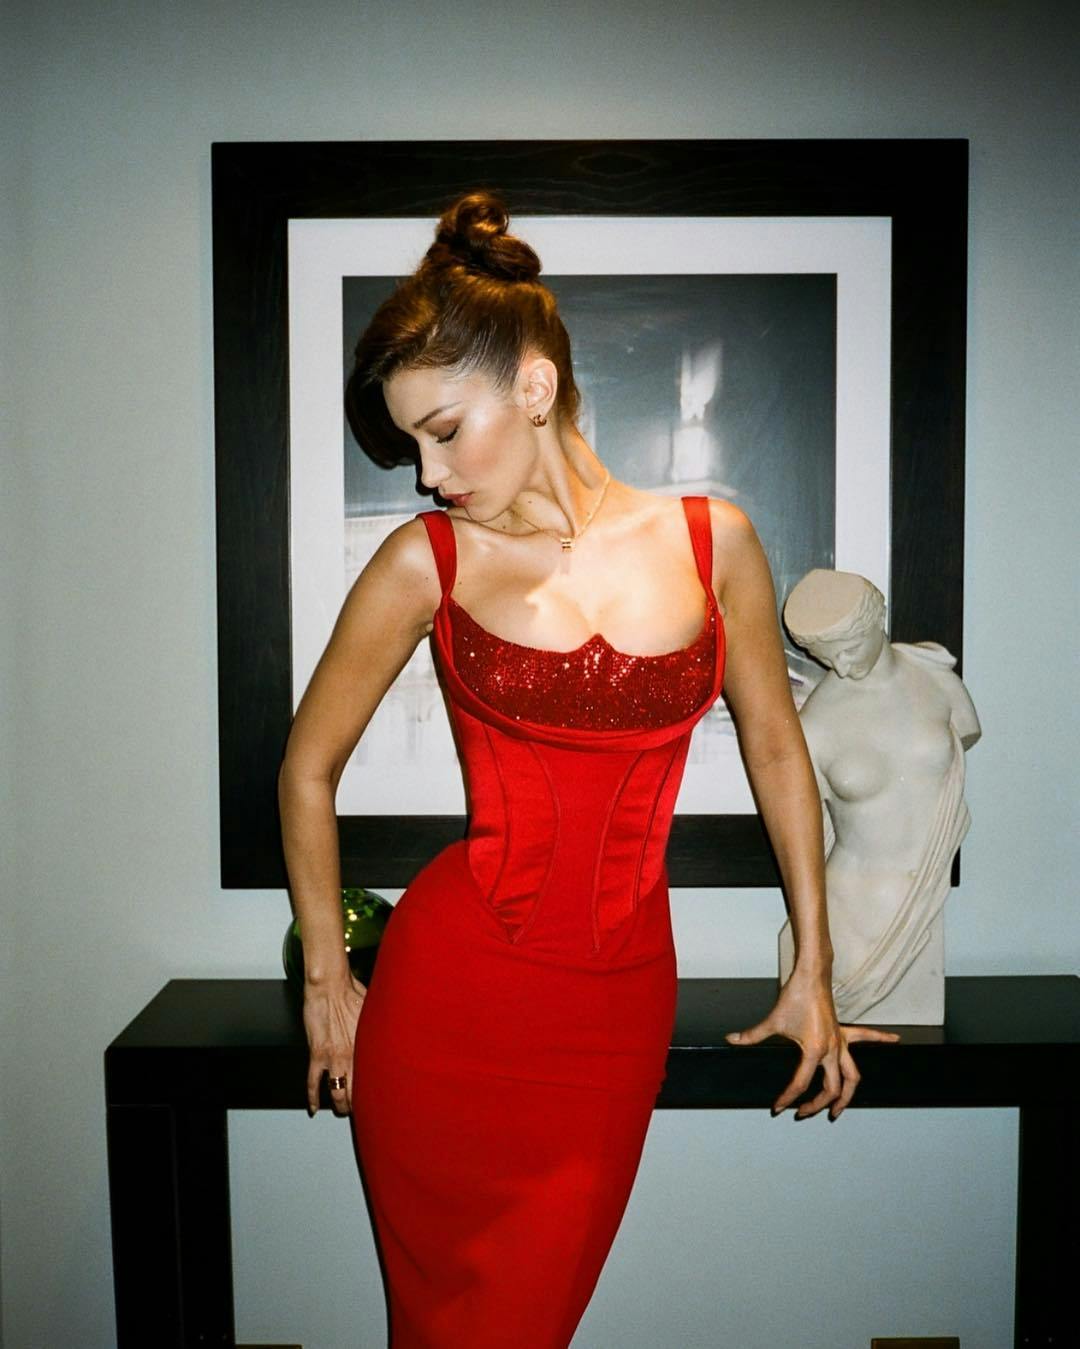 Holiday Outfit Inspo: Add A Pop Of Red